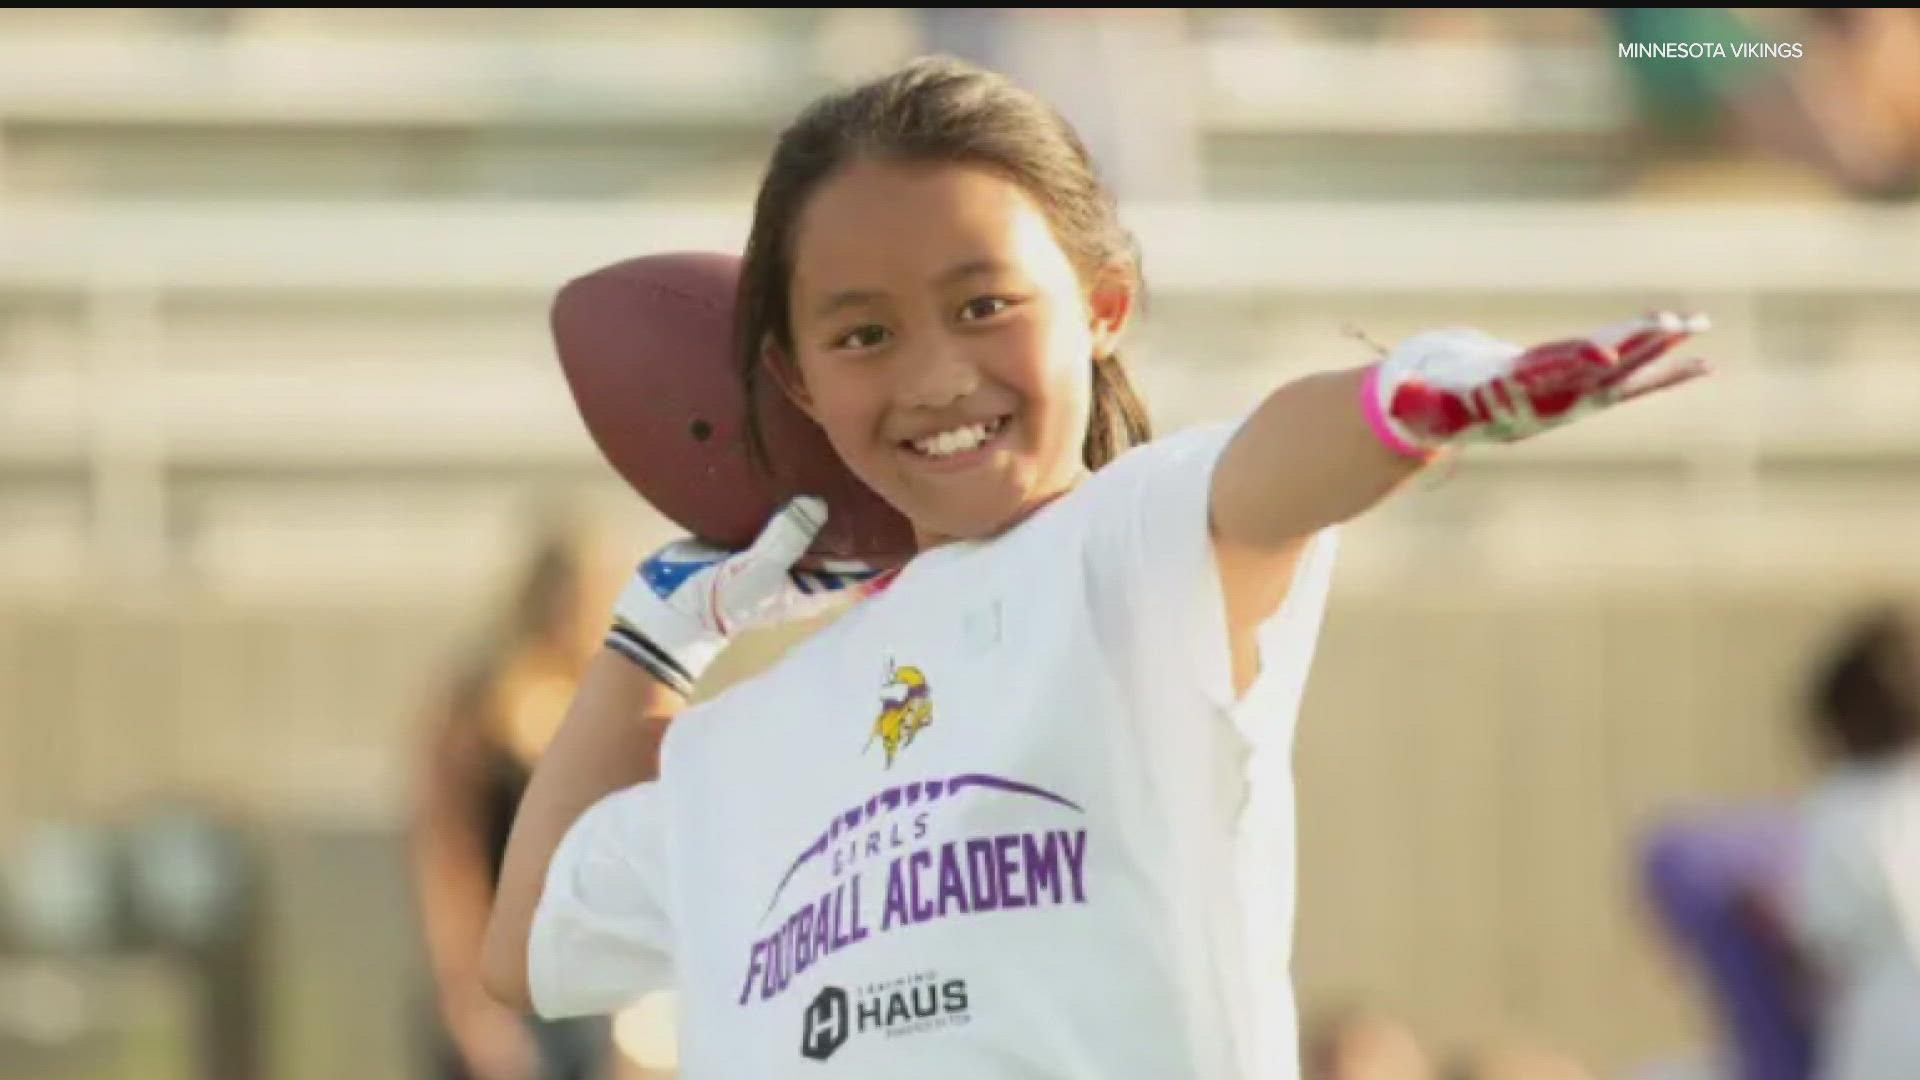 The pilot league in Minneapolis is part of the NFL team's vision to make girls flag football a high school sanctioned sport in Minnesota.